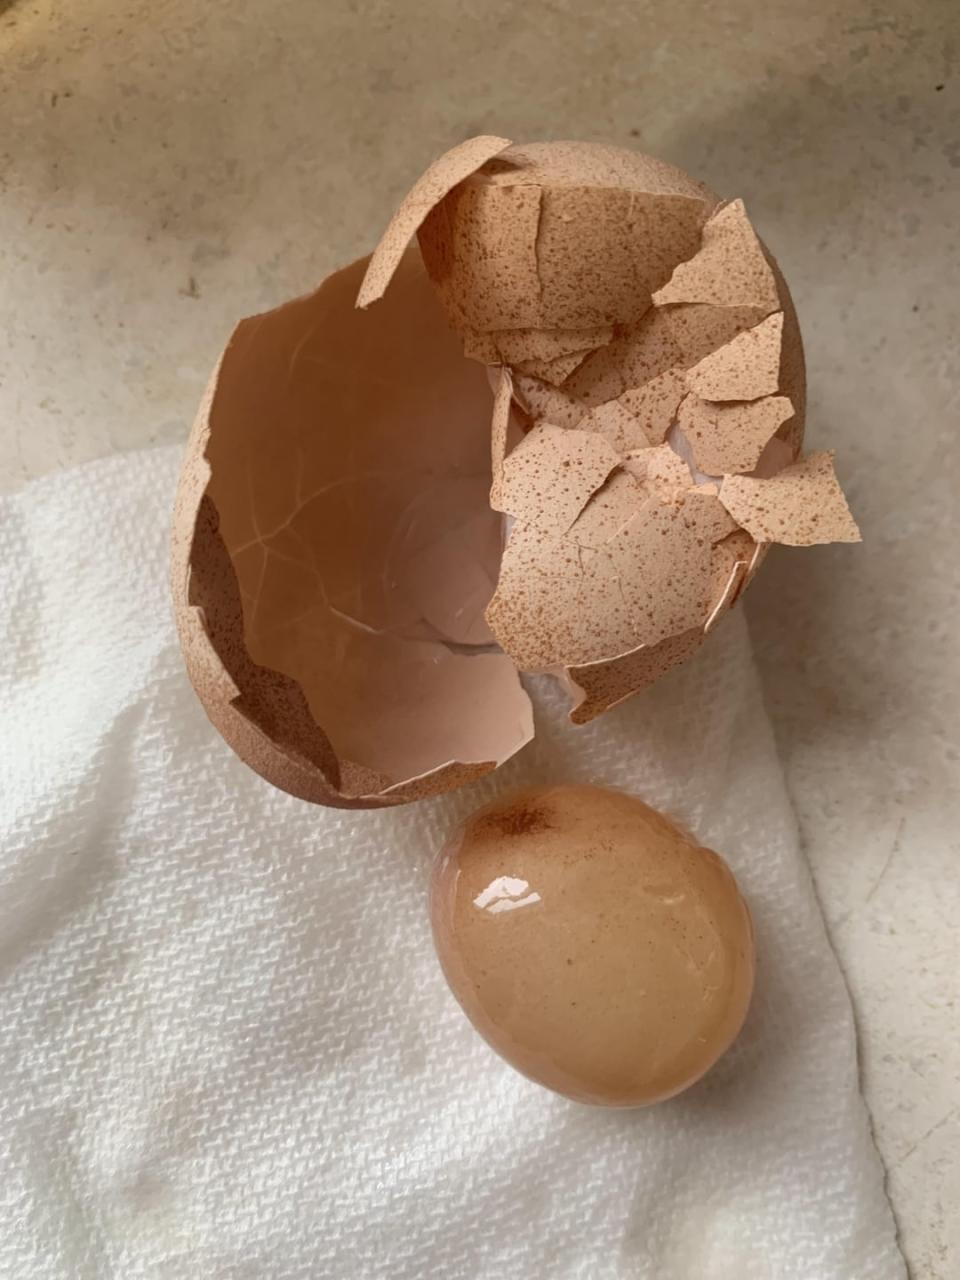 A broken shell with the perfectly formed whole egg that came out of it